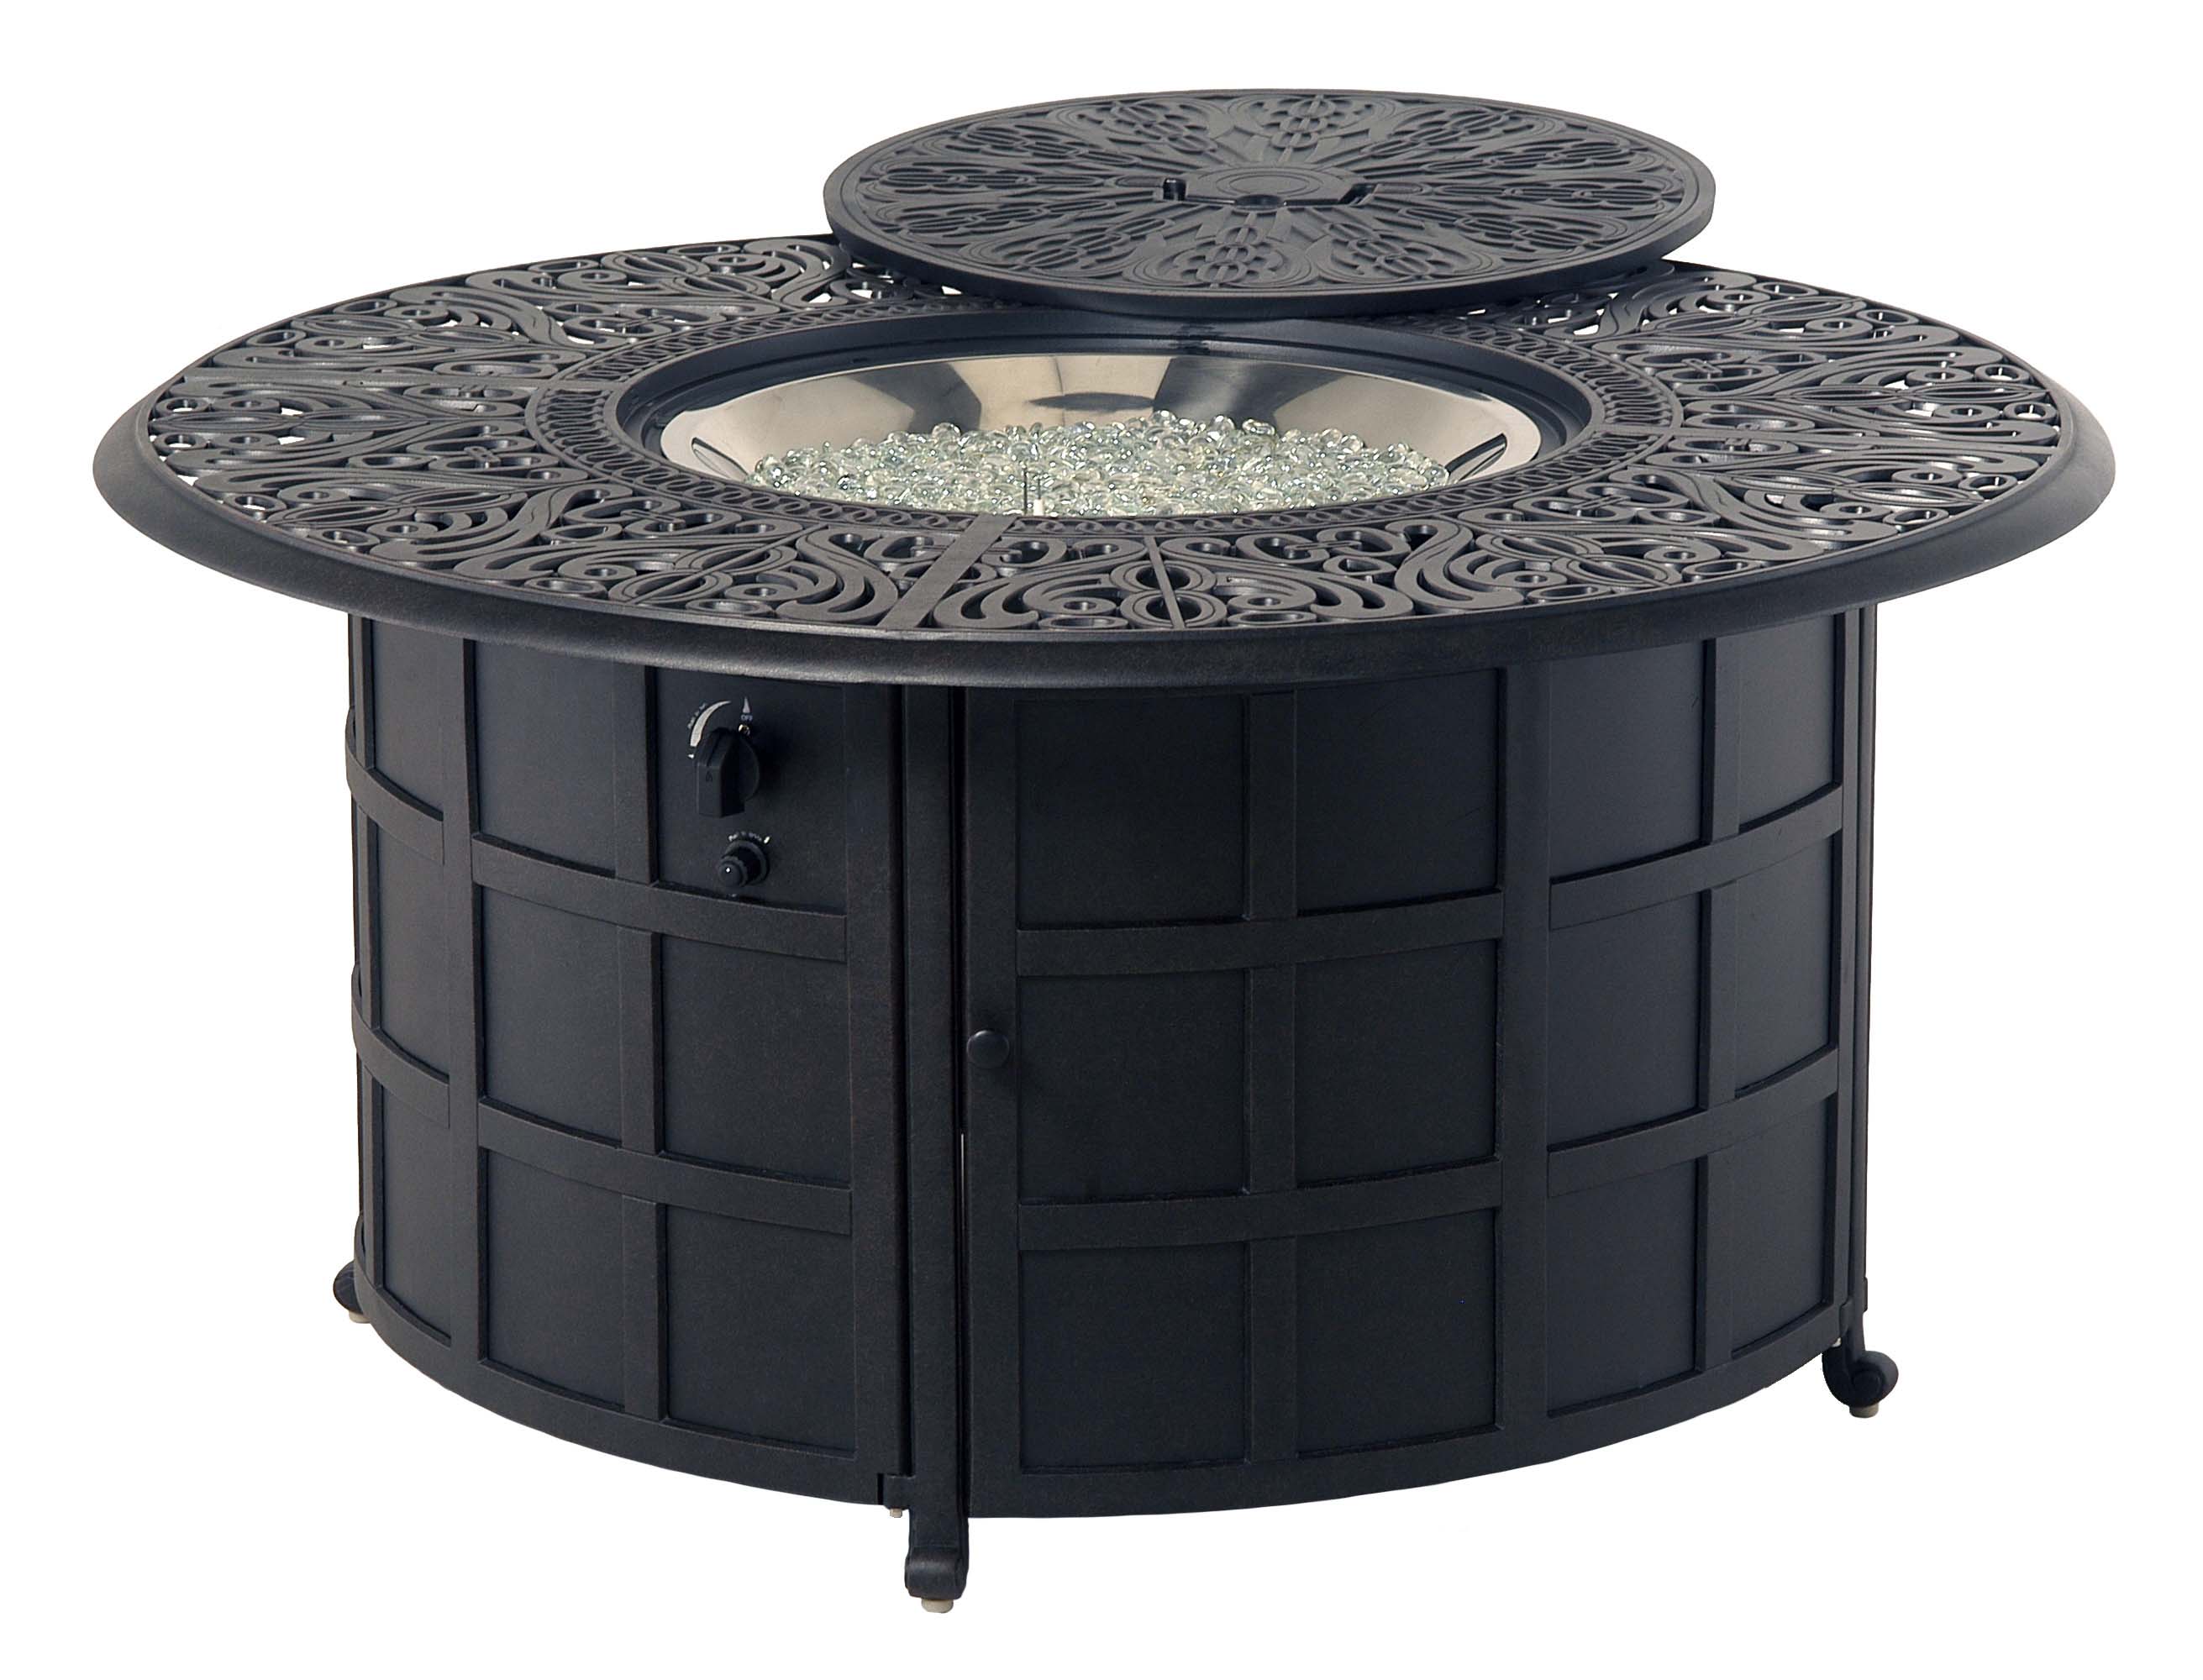 48" Rd Tuscany Enclosed Gas Fire Pit Table with Burner by Hanamint